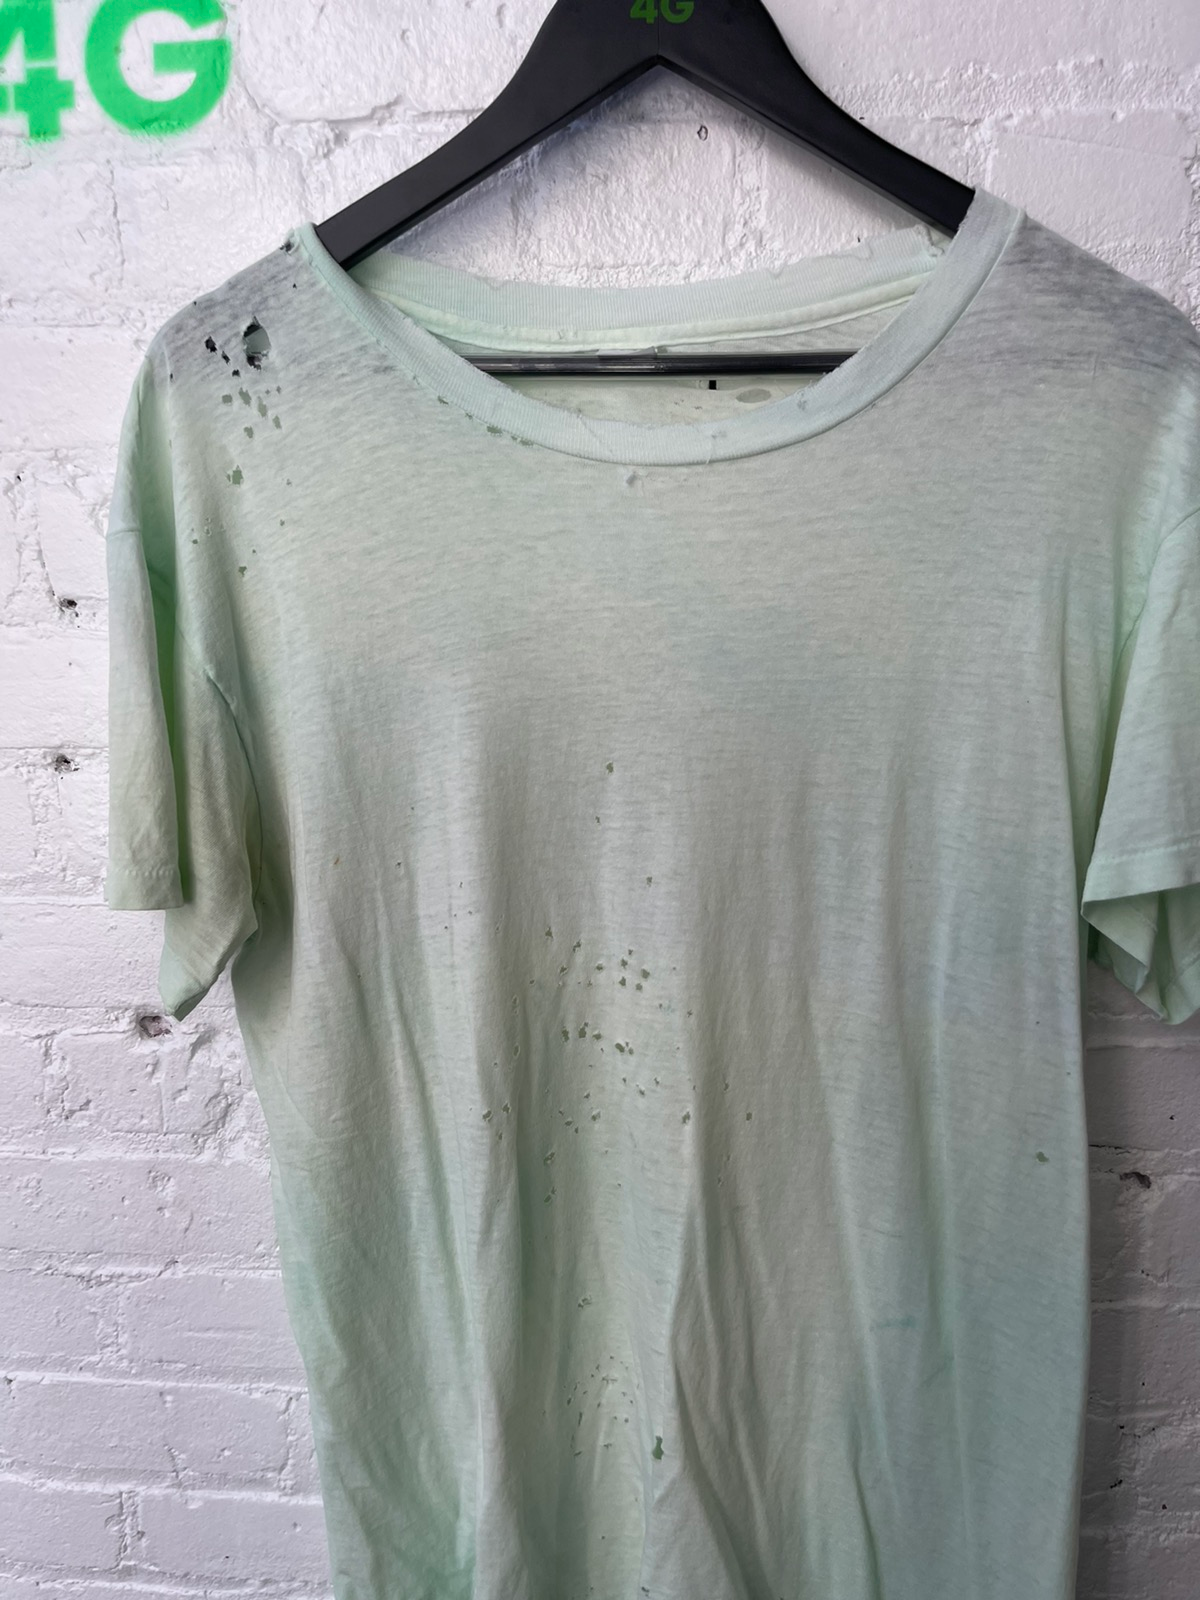 Vintage 90s THRASHED PAPER THIN LIME GREEN SHIRT 4Gseller